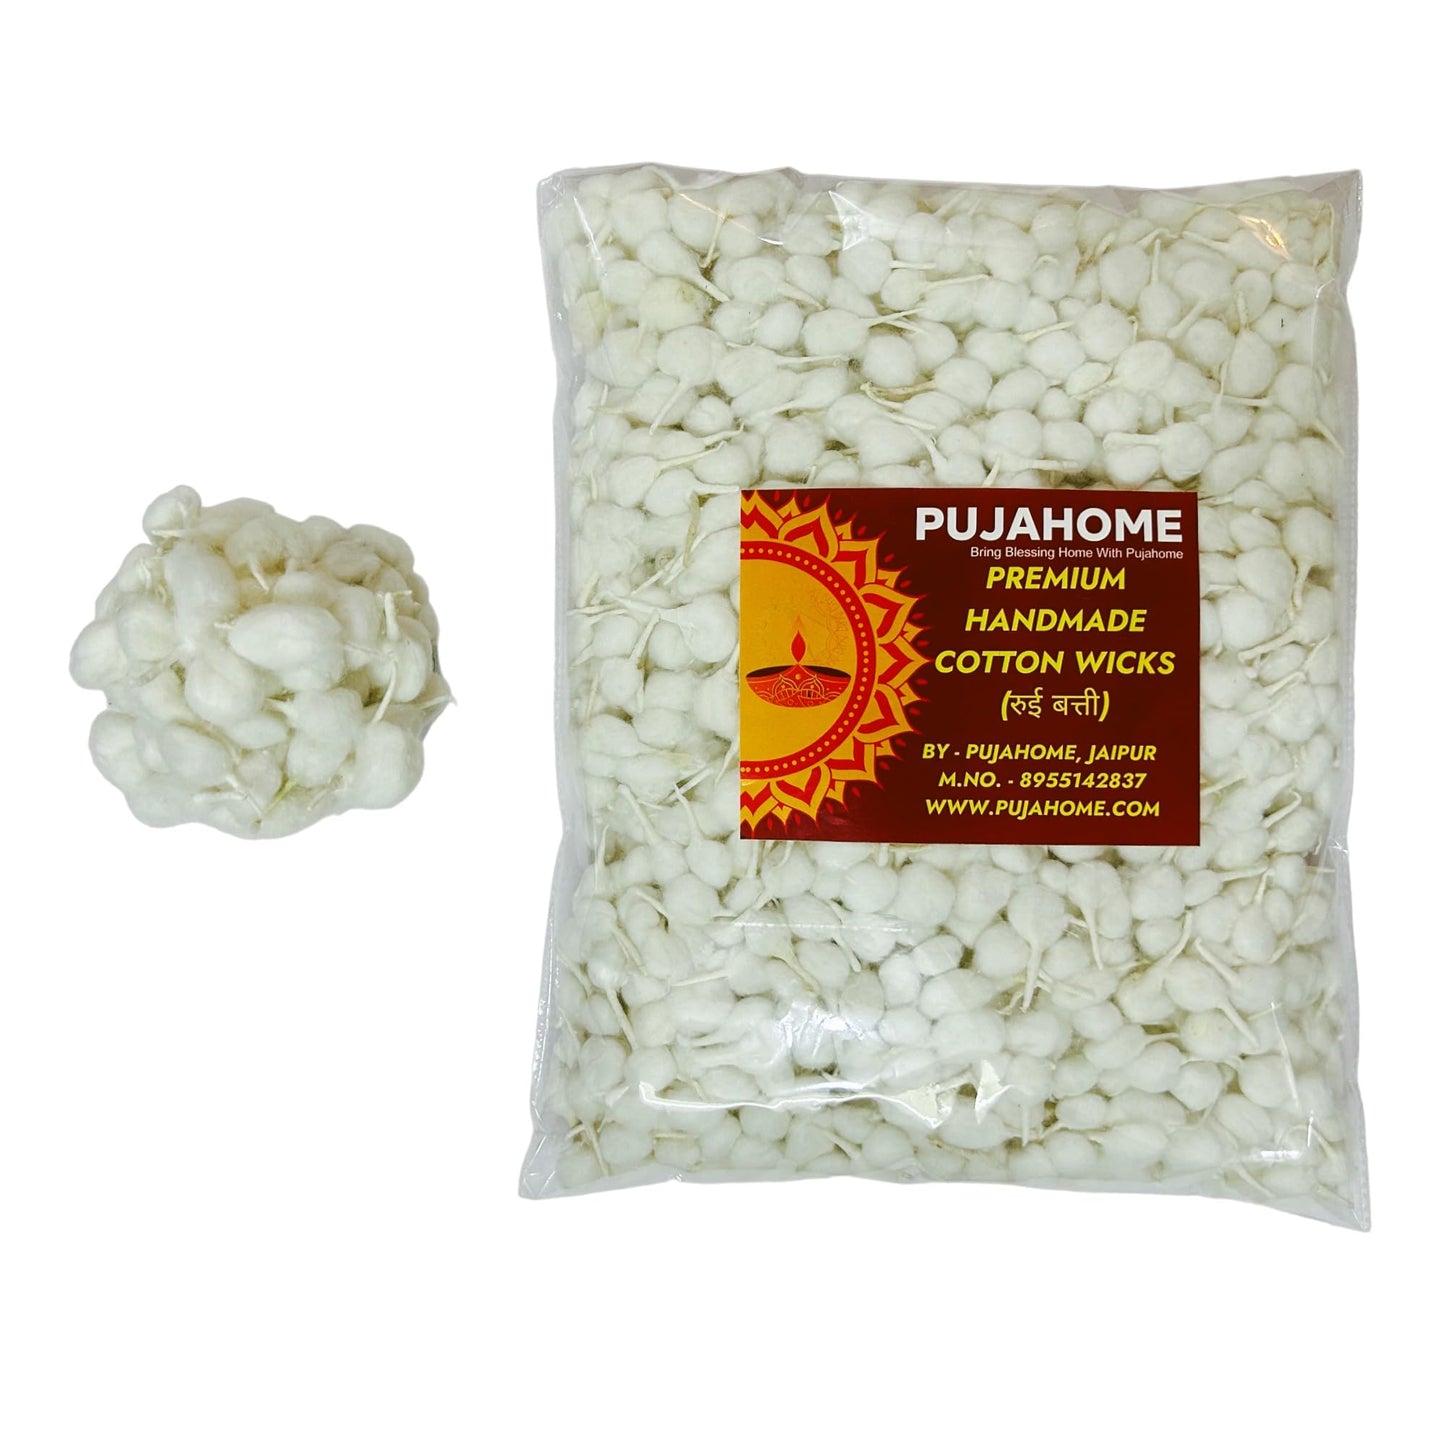 Pujahome Handmade Round Cotton Wicks (GOL Batti) for Diya - 3100 Pieces, Ideal for Puja & Rituals (White)